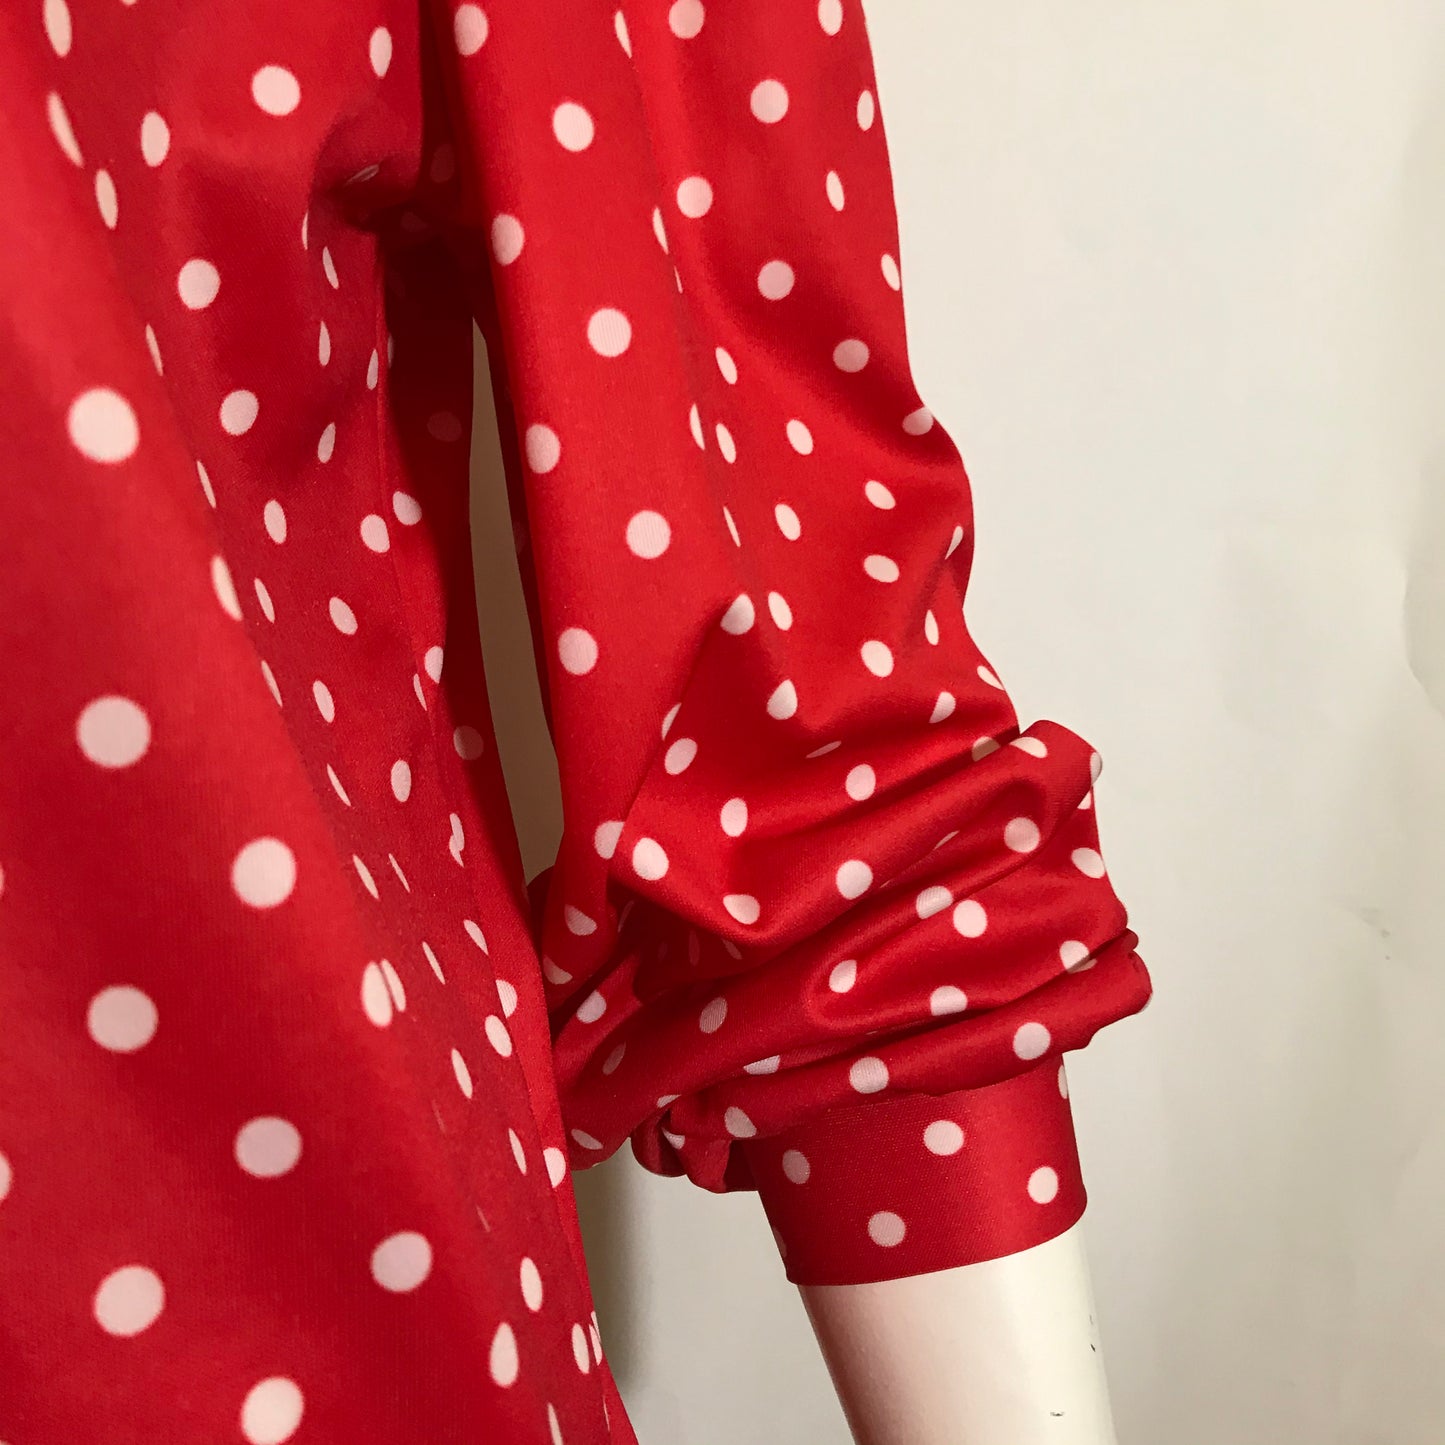 Red and White Polka Dot Button Up Blouse with Pussy Bow circa 1970s